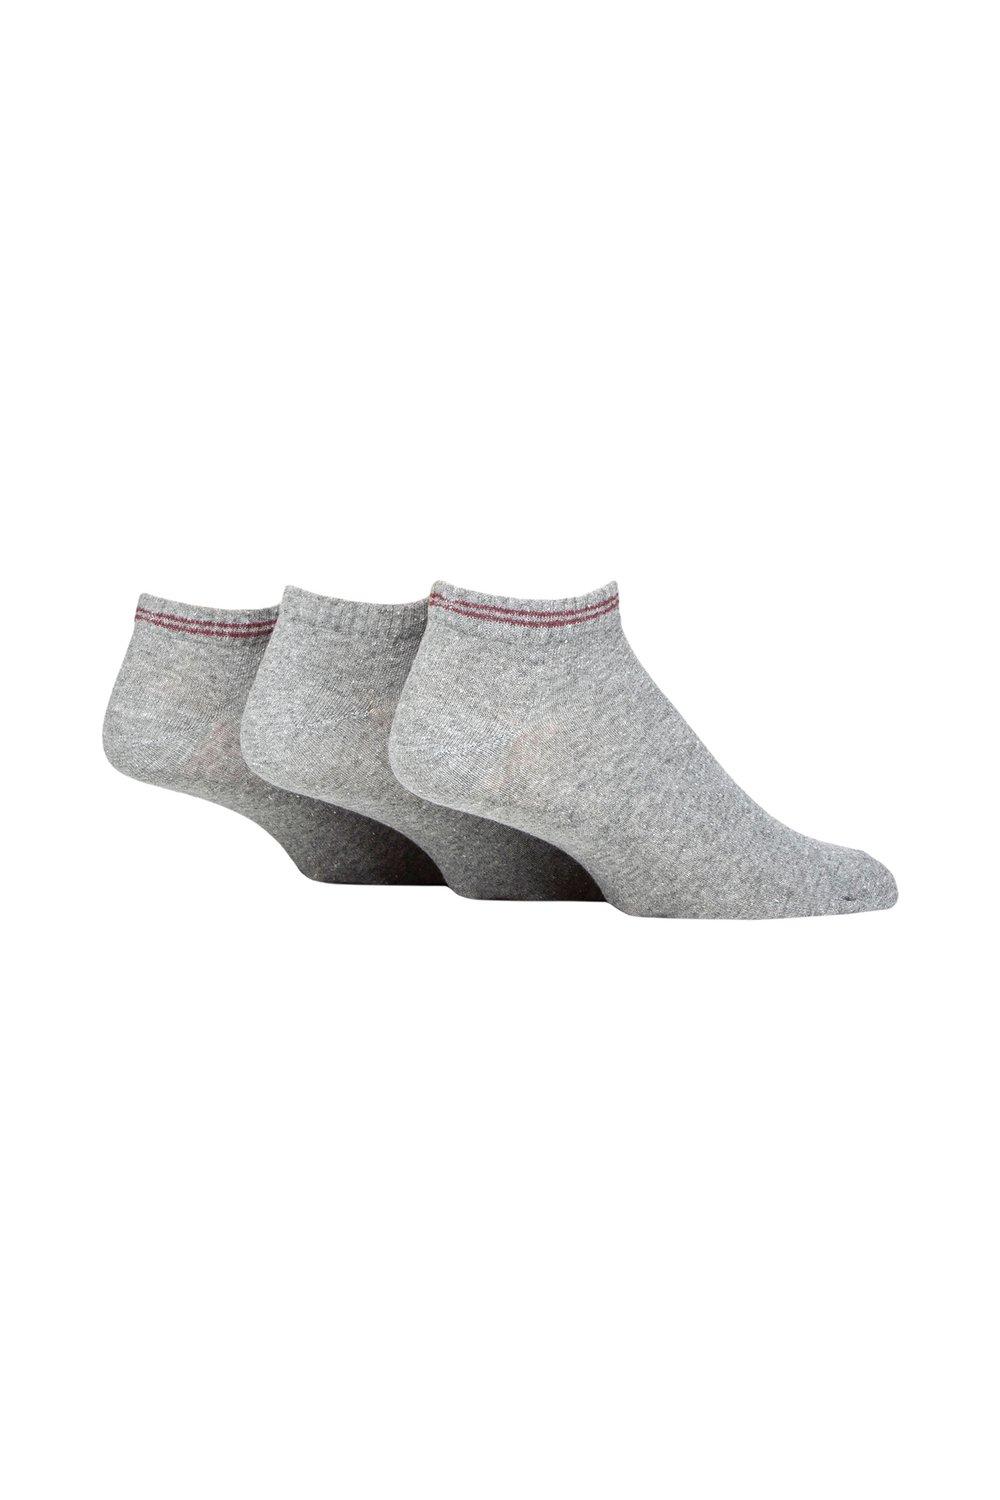 3 Pair 100% Recycled Fashion Cotton Sports Trainer Socks